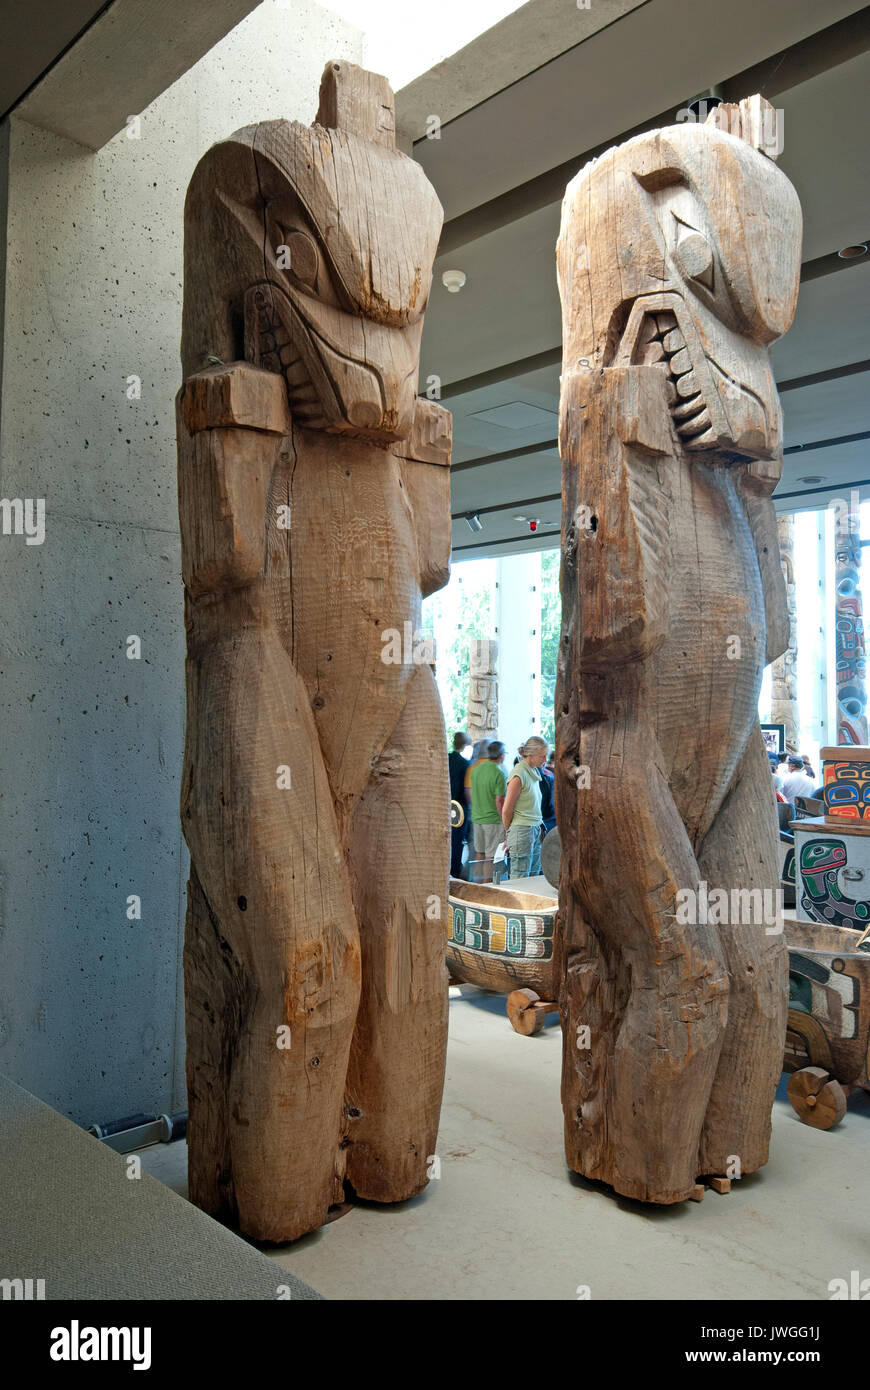 Grizzly bear sculptures carved by Kwakwaka'wakw artist Awalaskanis, Museum of Anthropology, Vancouver, British Columbia, Canada Stock Photo